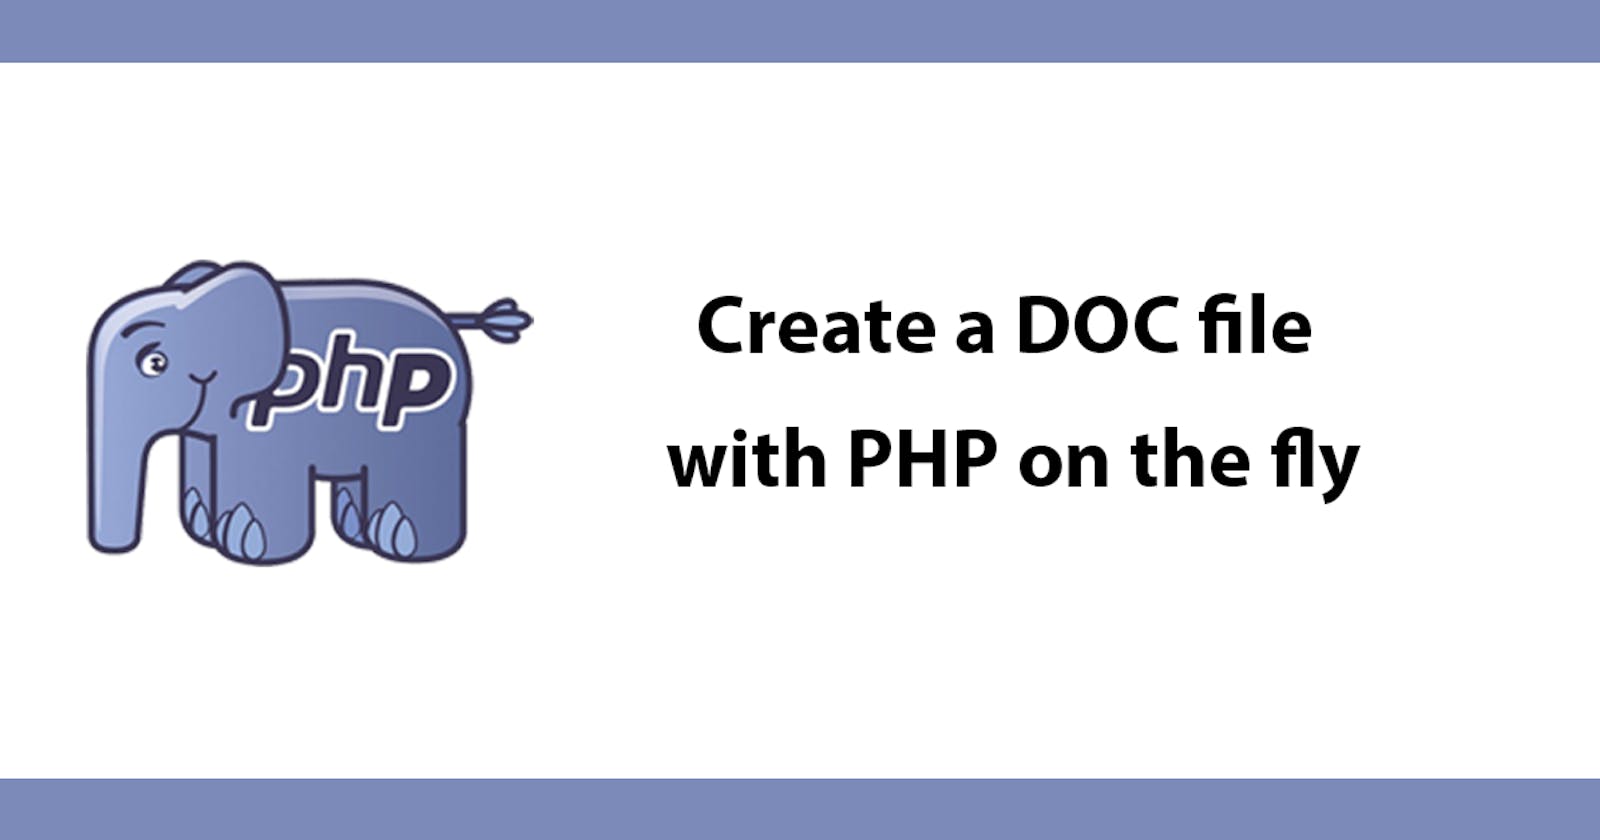 Create a DOC file with PHP on the fly